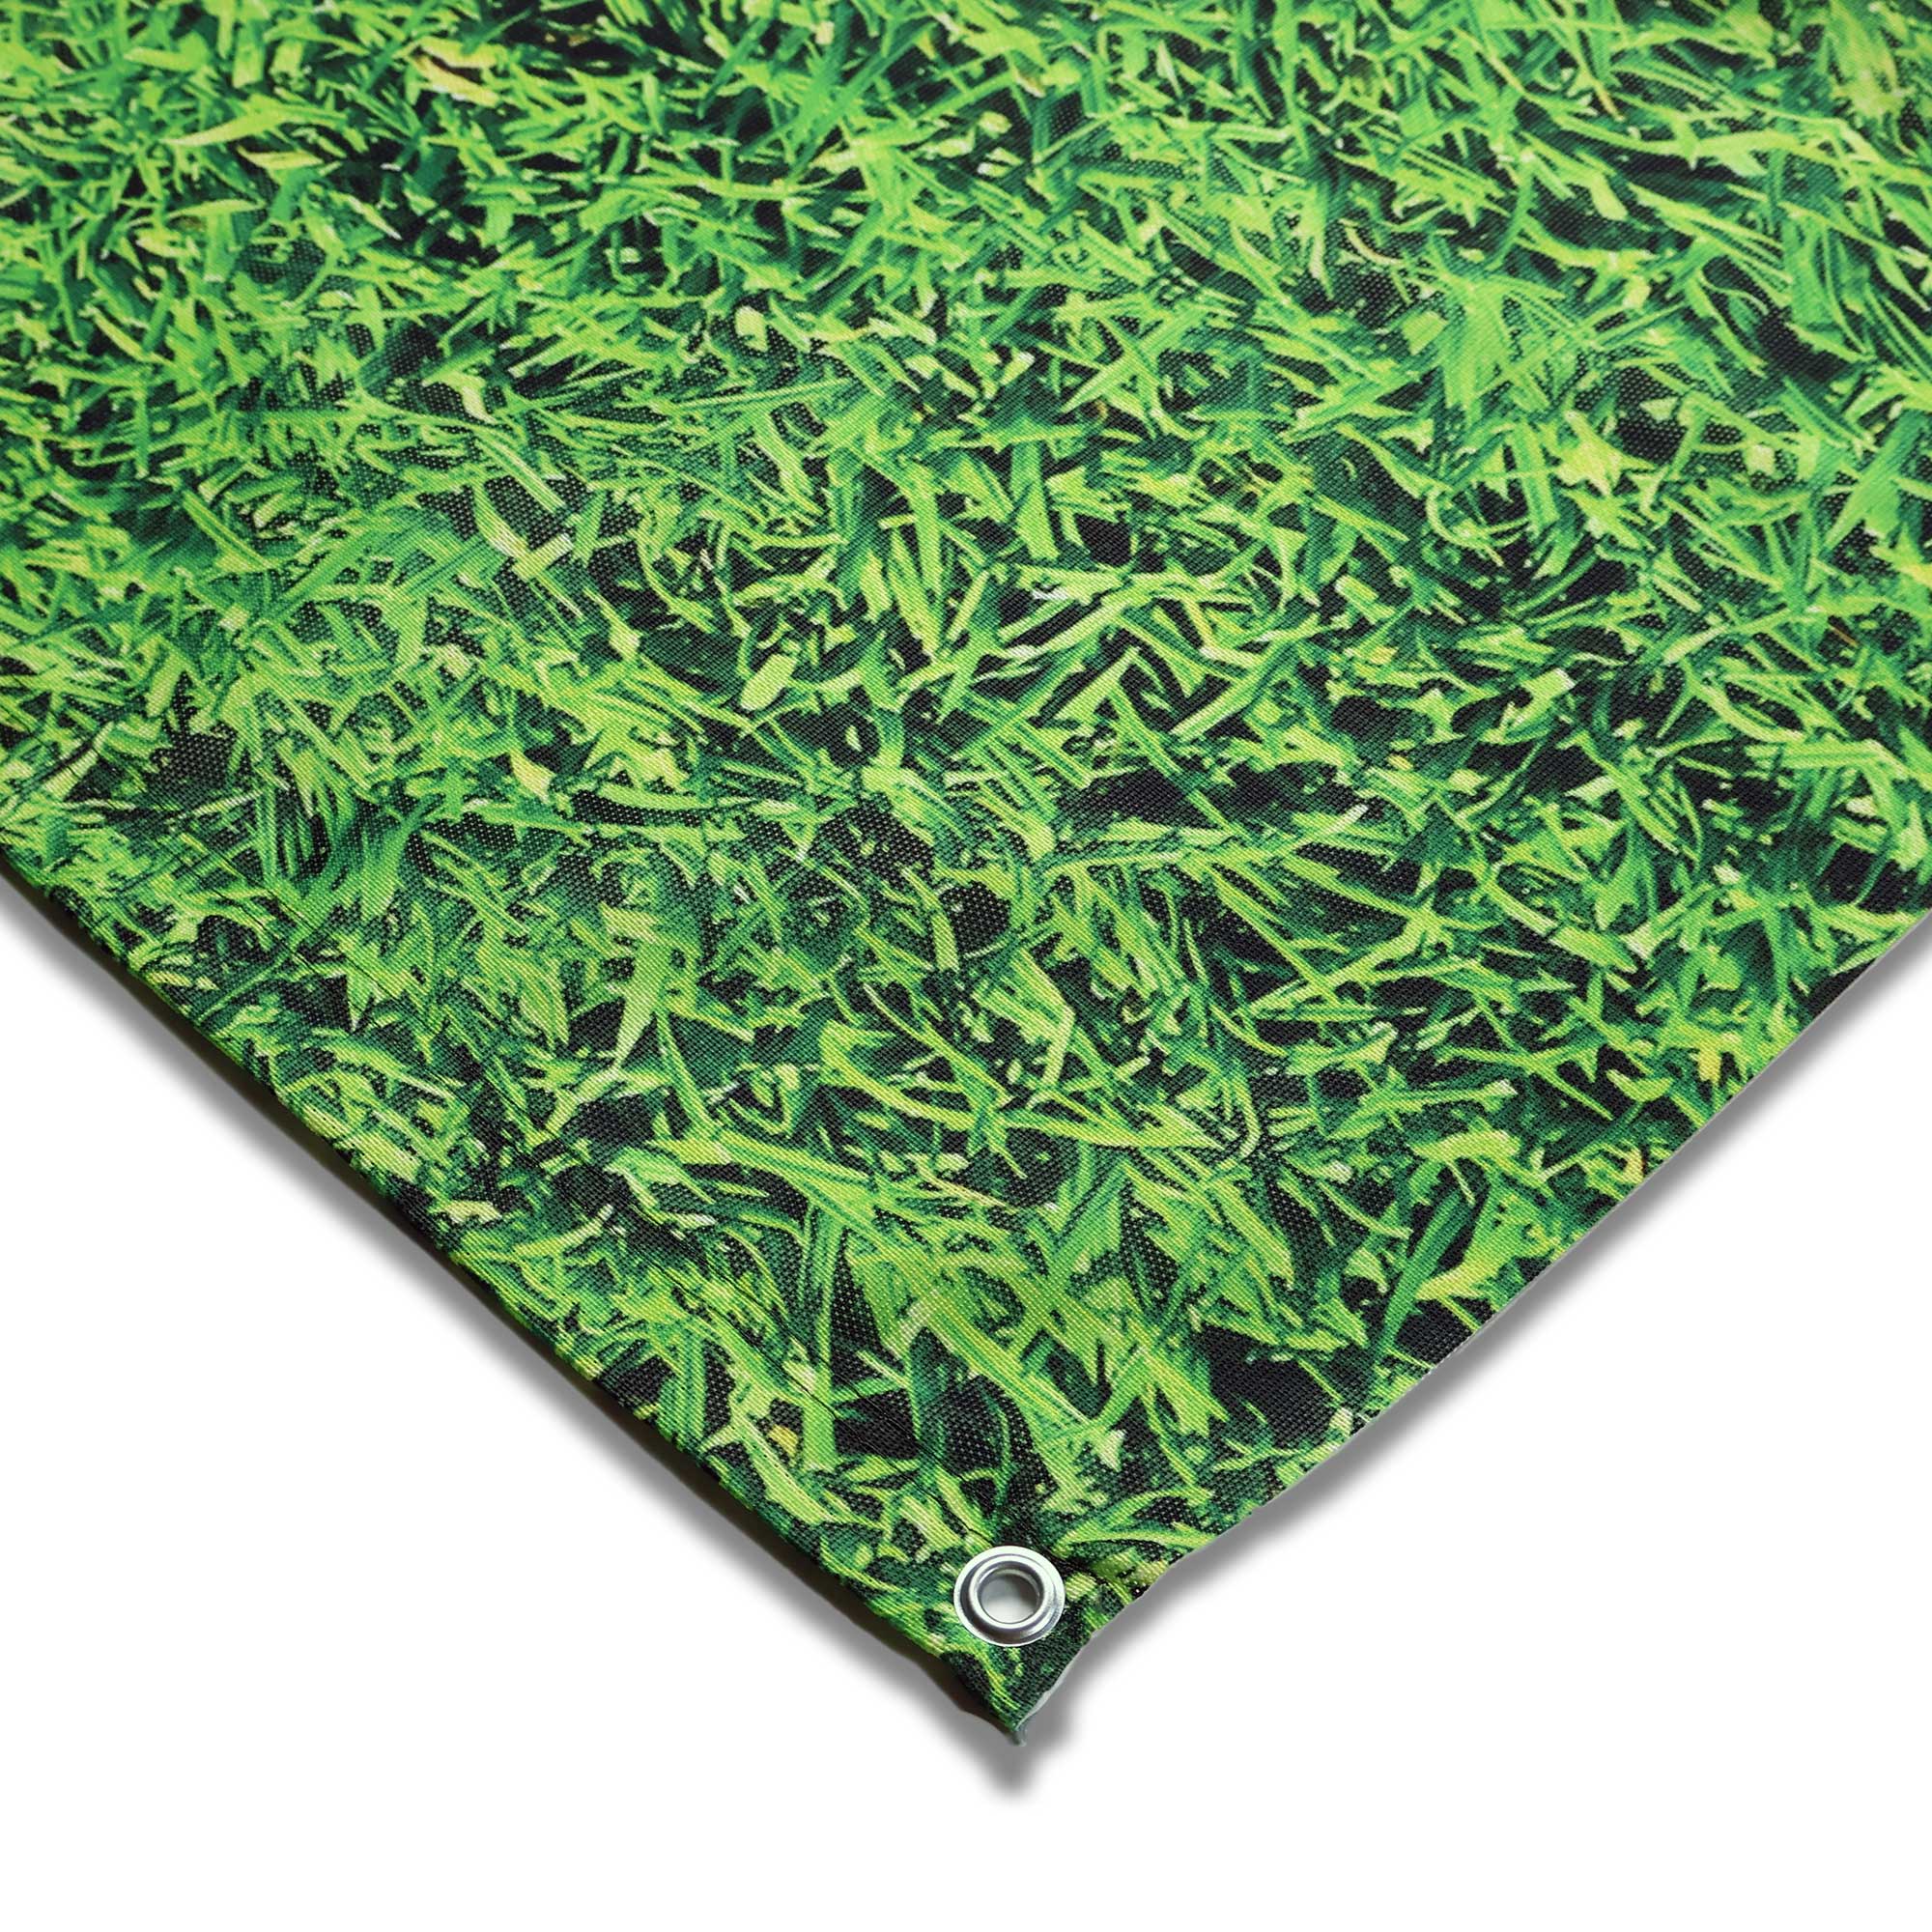 PREMIUM awning carpet with removable wind skirt - "Lawn"